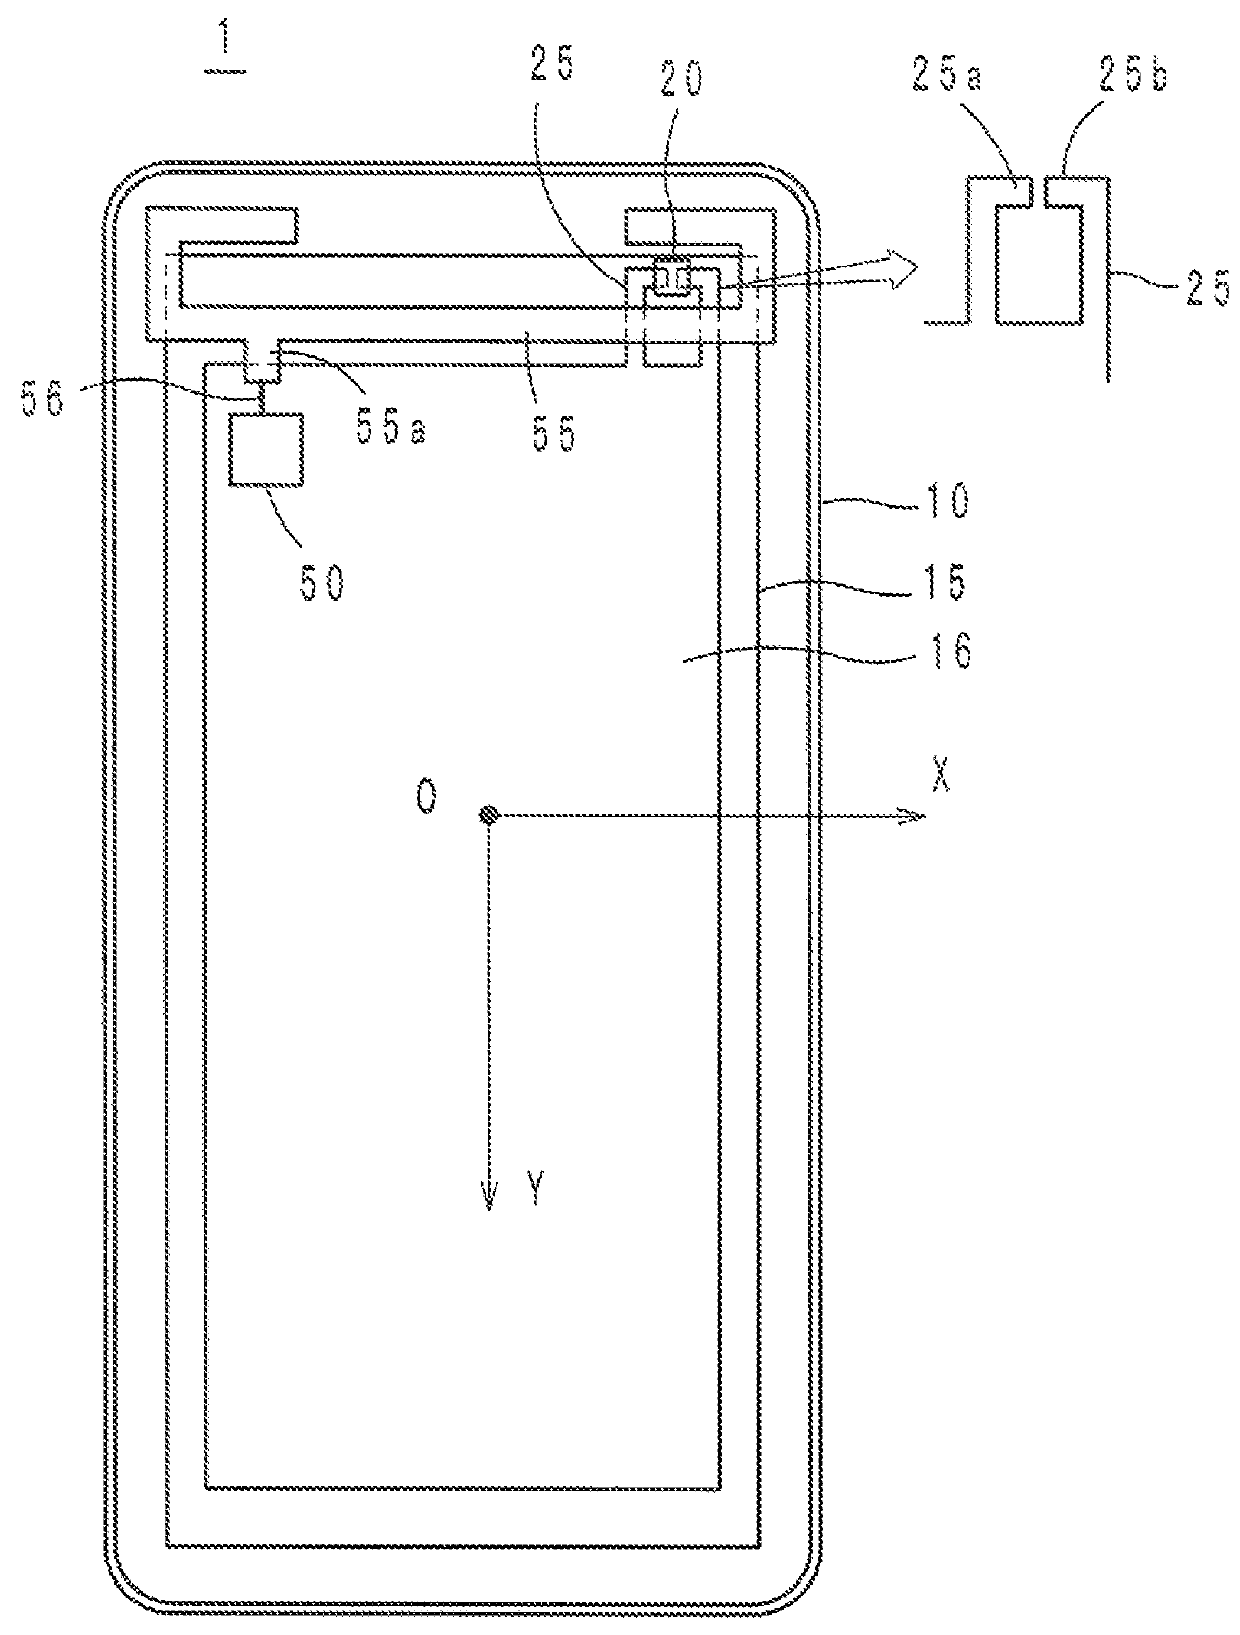 Communication terminal device including a UHF-band RFID system